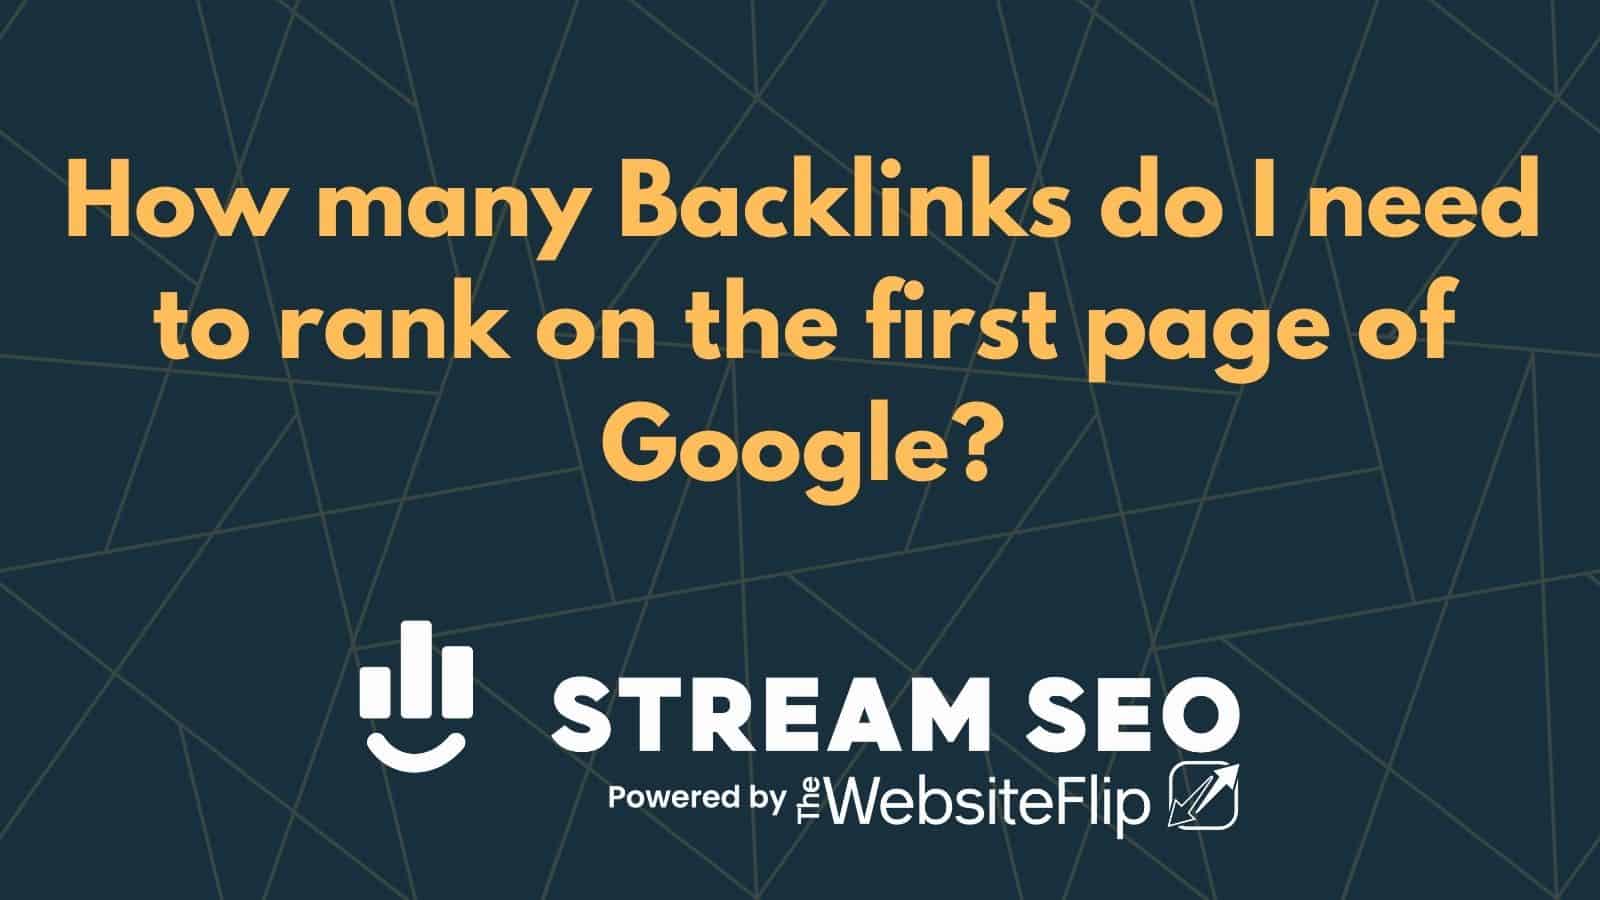 How many Backlinks do I need to rank on the first page of Google?